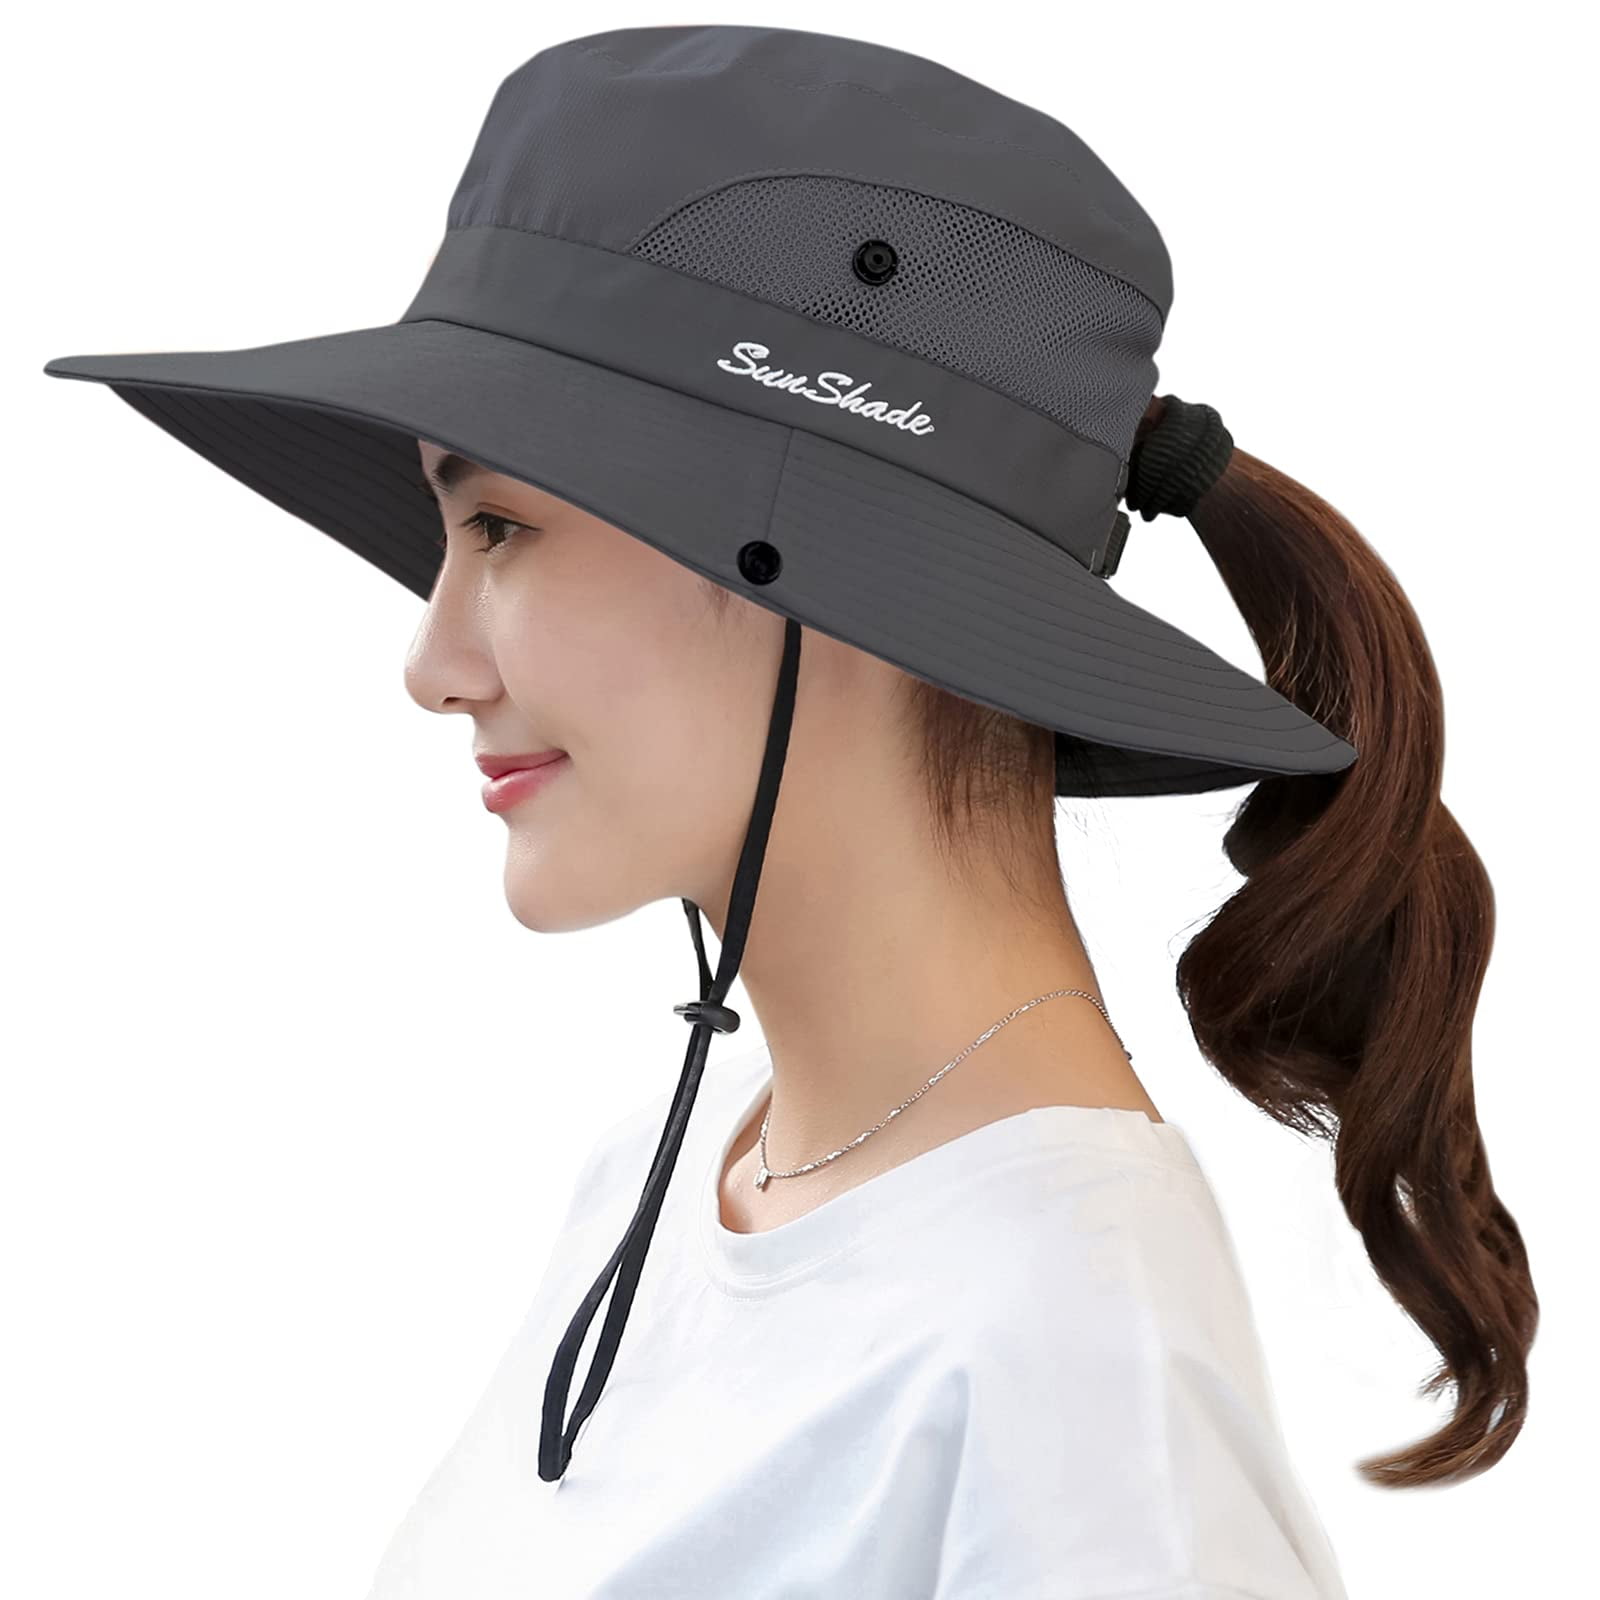 Women Adjustable Outdoor Sun Hat UV Protection Wide Brim Foldable Mesh Summer Beach Hiking Fishing Hats with Ponytail Hole 